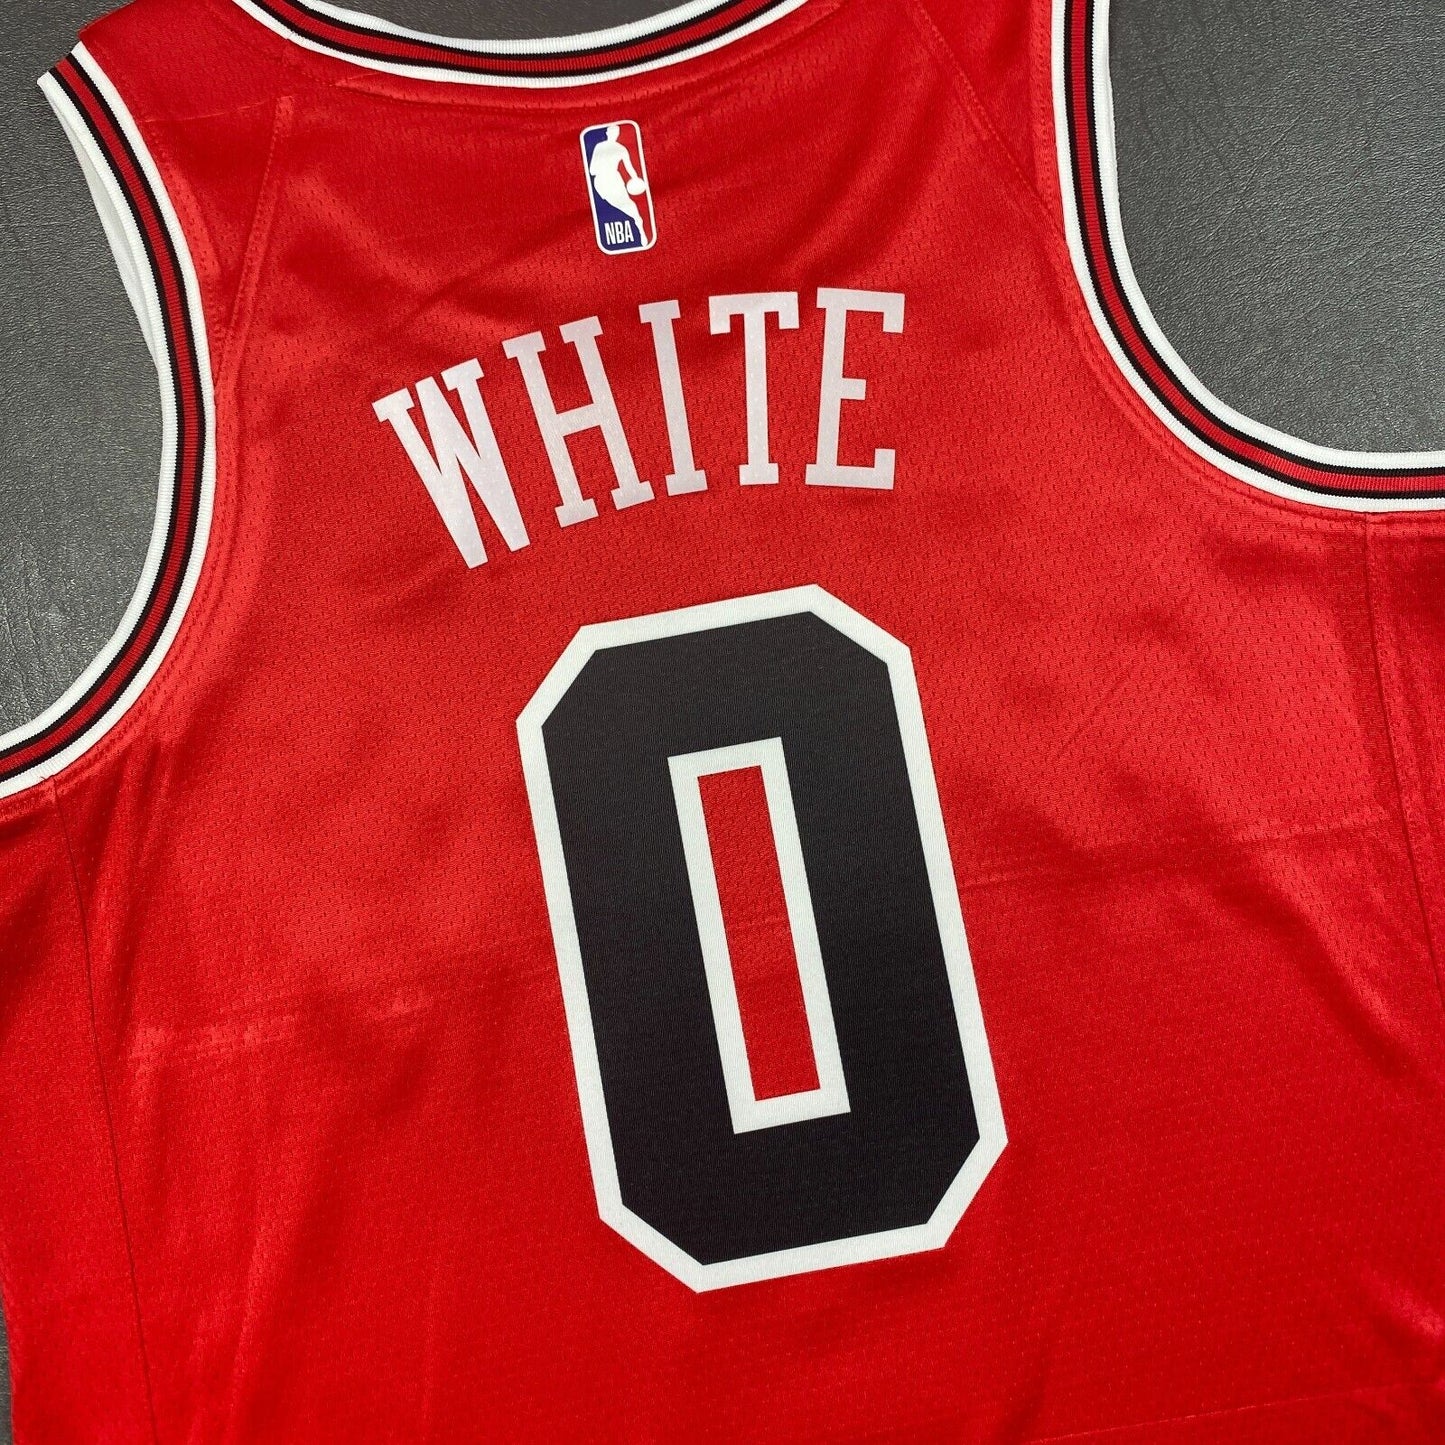 100% Authentic Coby White Nike Bulls Icon Edition Swingman Jersey Size 44 M Mens